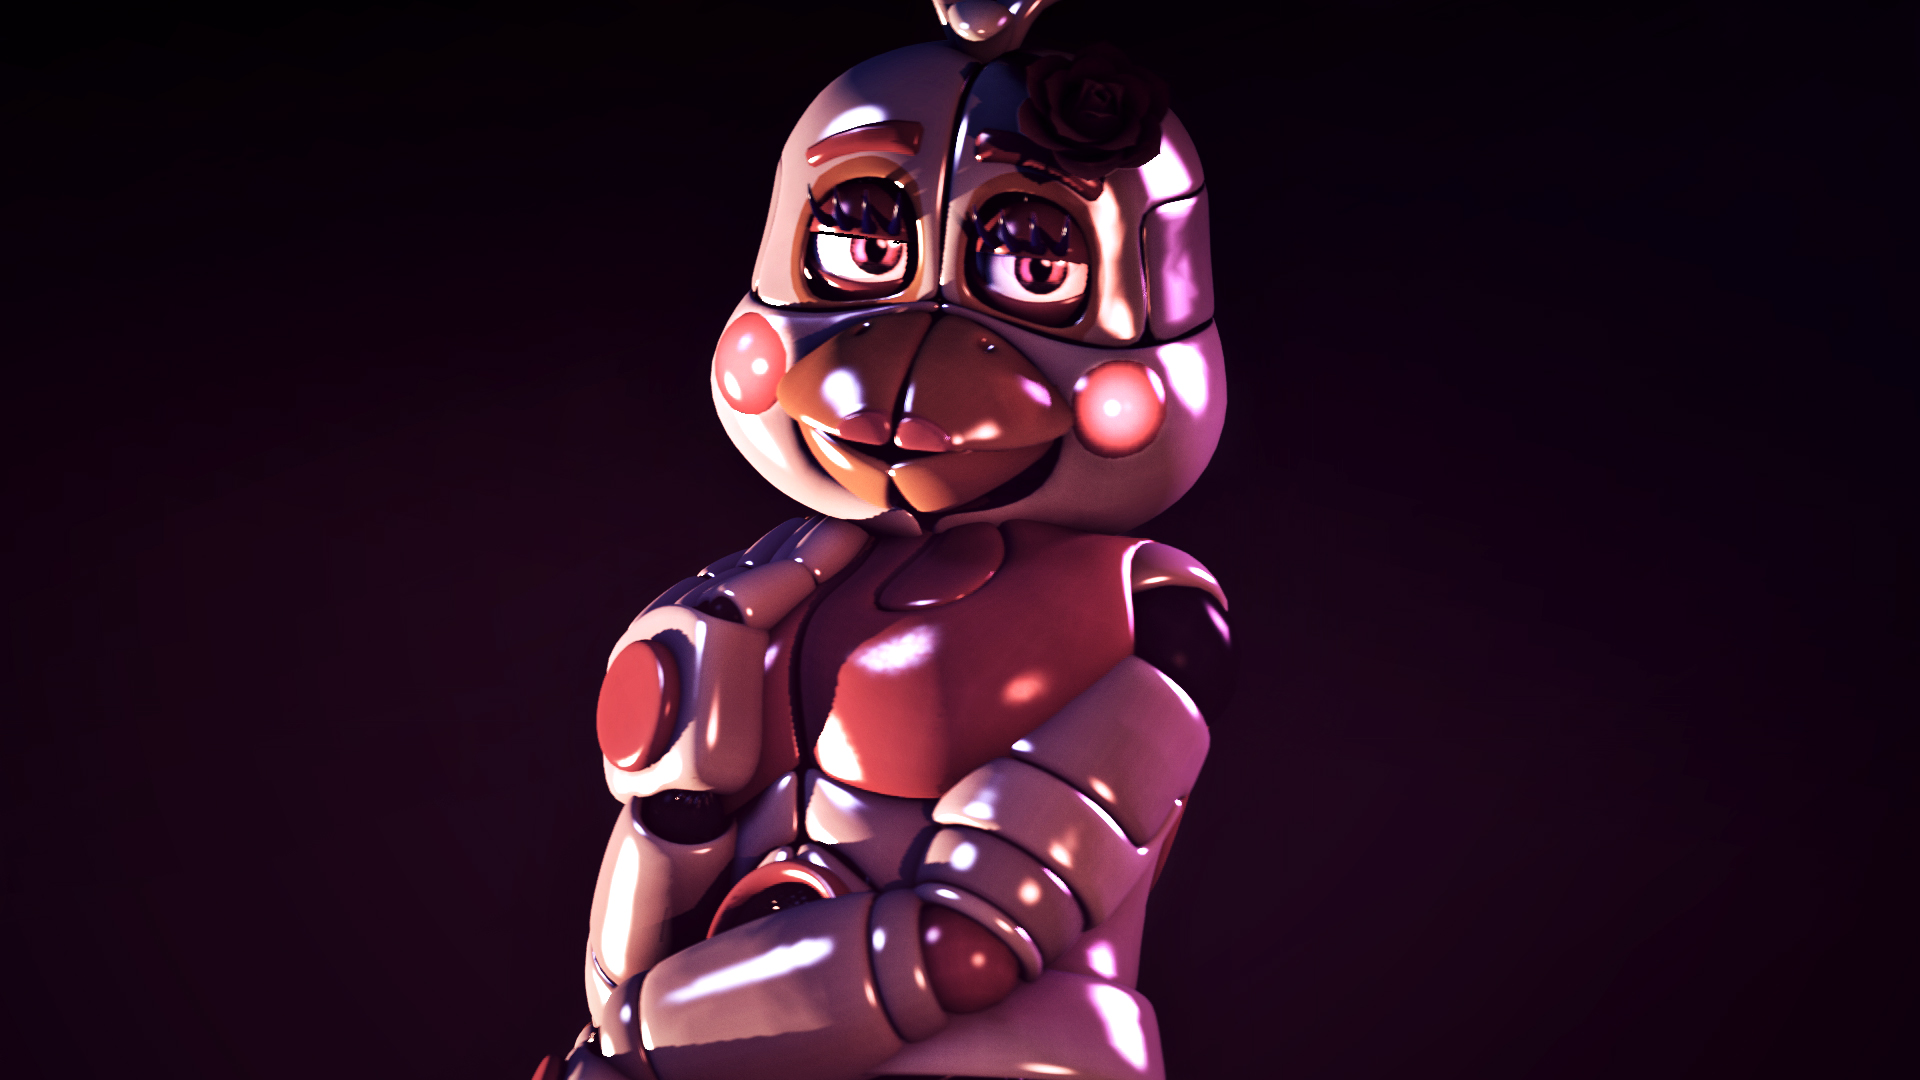 Funtime Chica!! by CutManTimeManPower